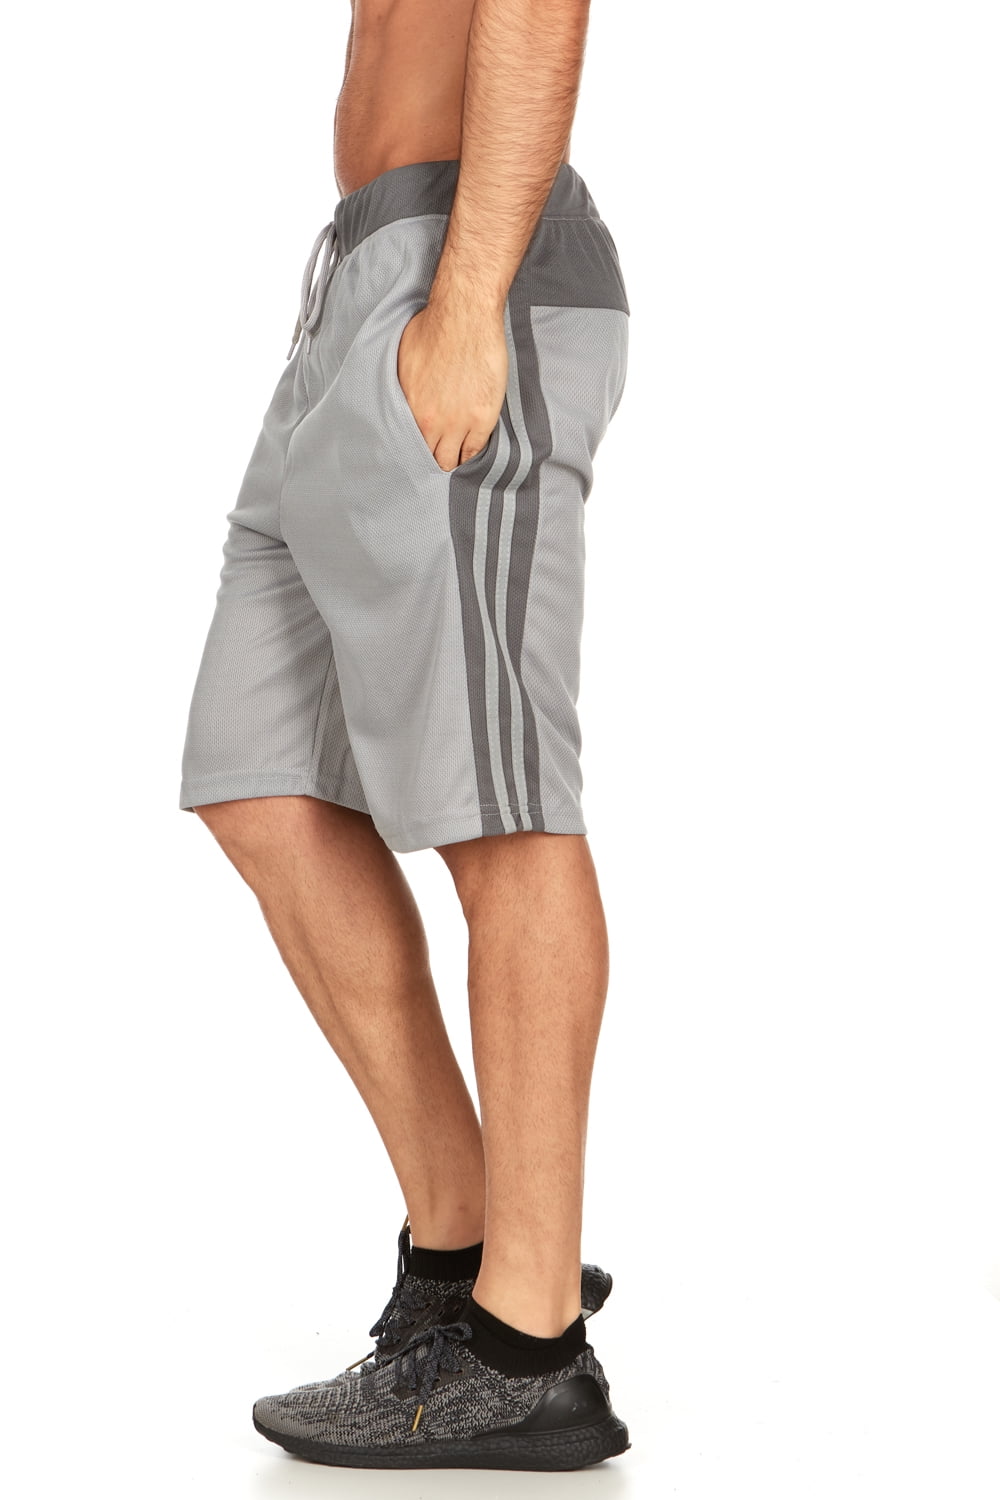 Saml op ornament glide Men's and Big Men's 9" Active Shorts, Mesh Athletic Gym shorts with  pockets, Sizes up to 3X - Walmart.com